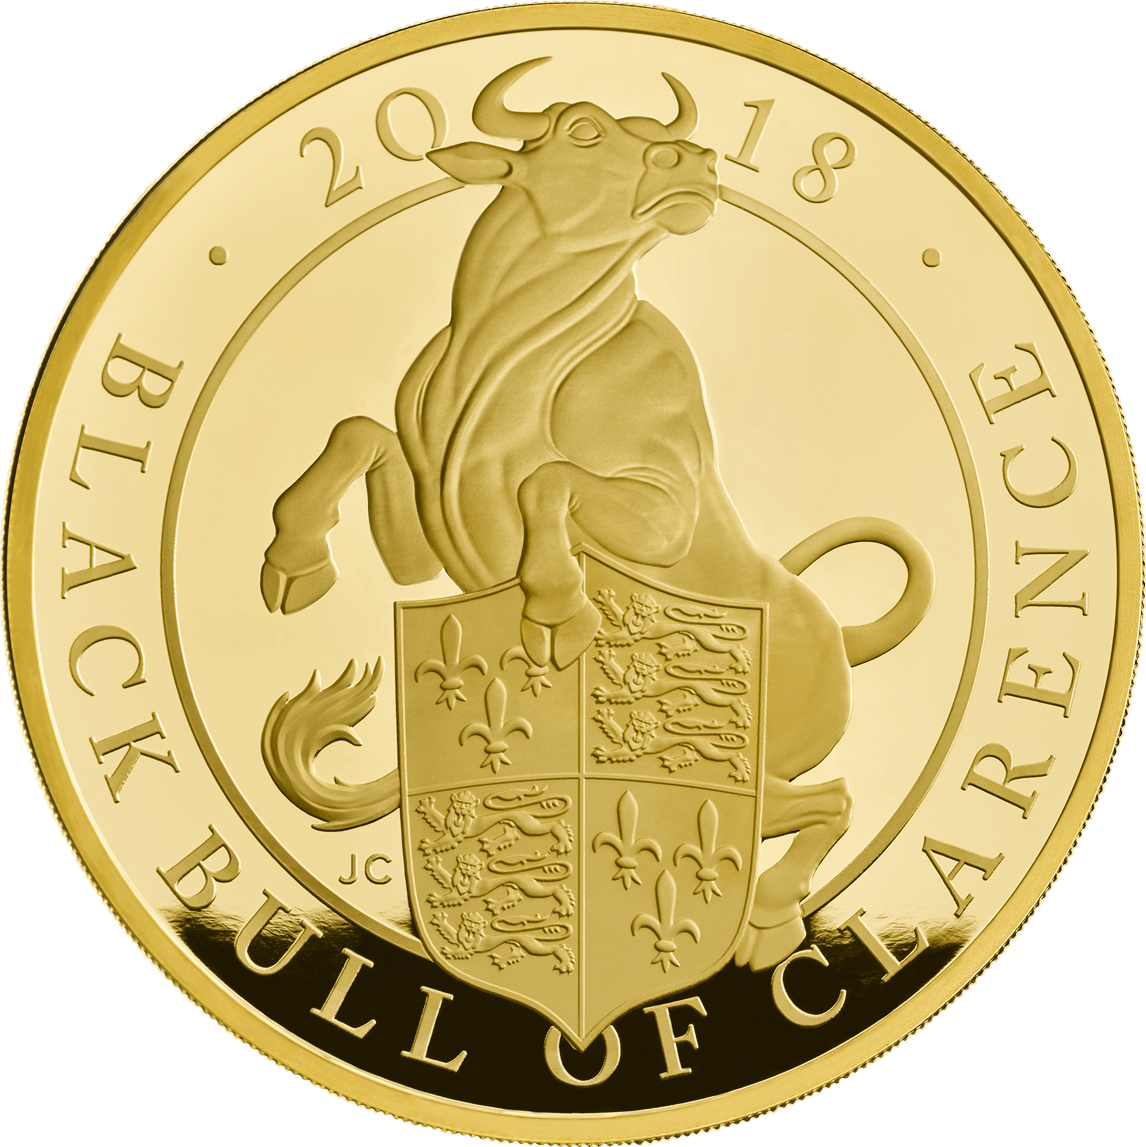 The Black Bull of Clarence | The Royal Mint